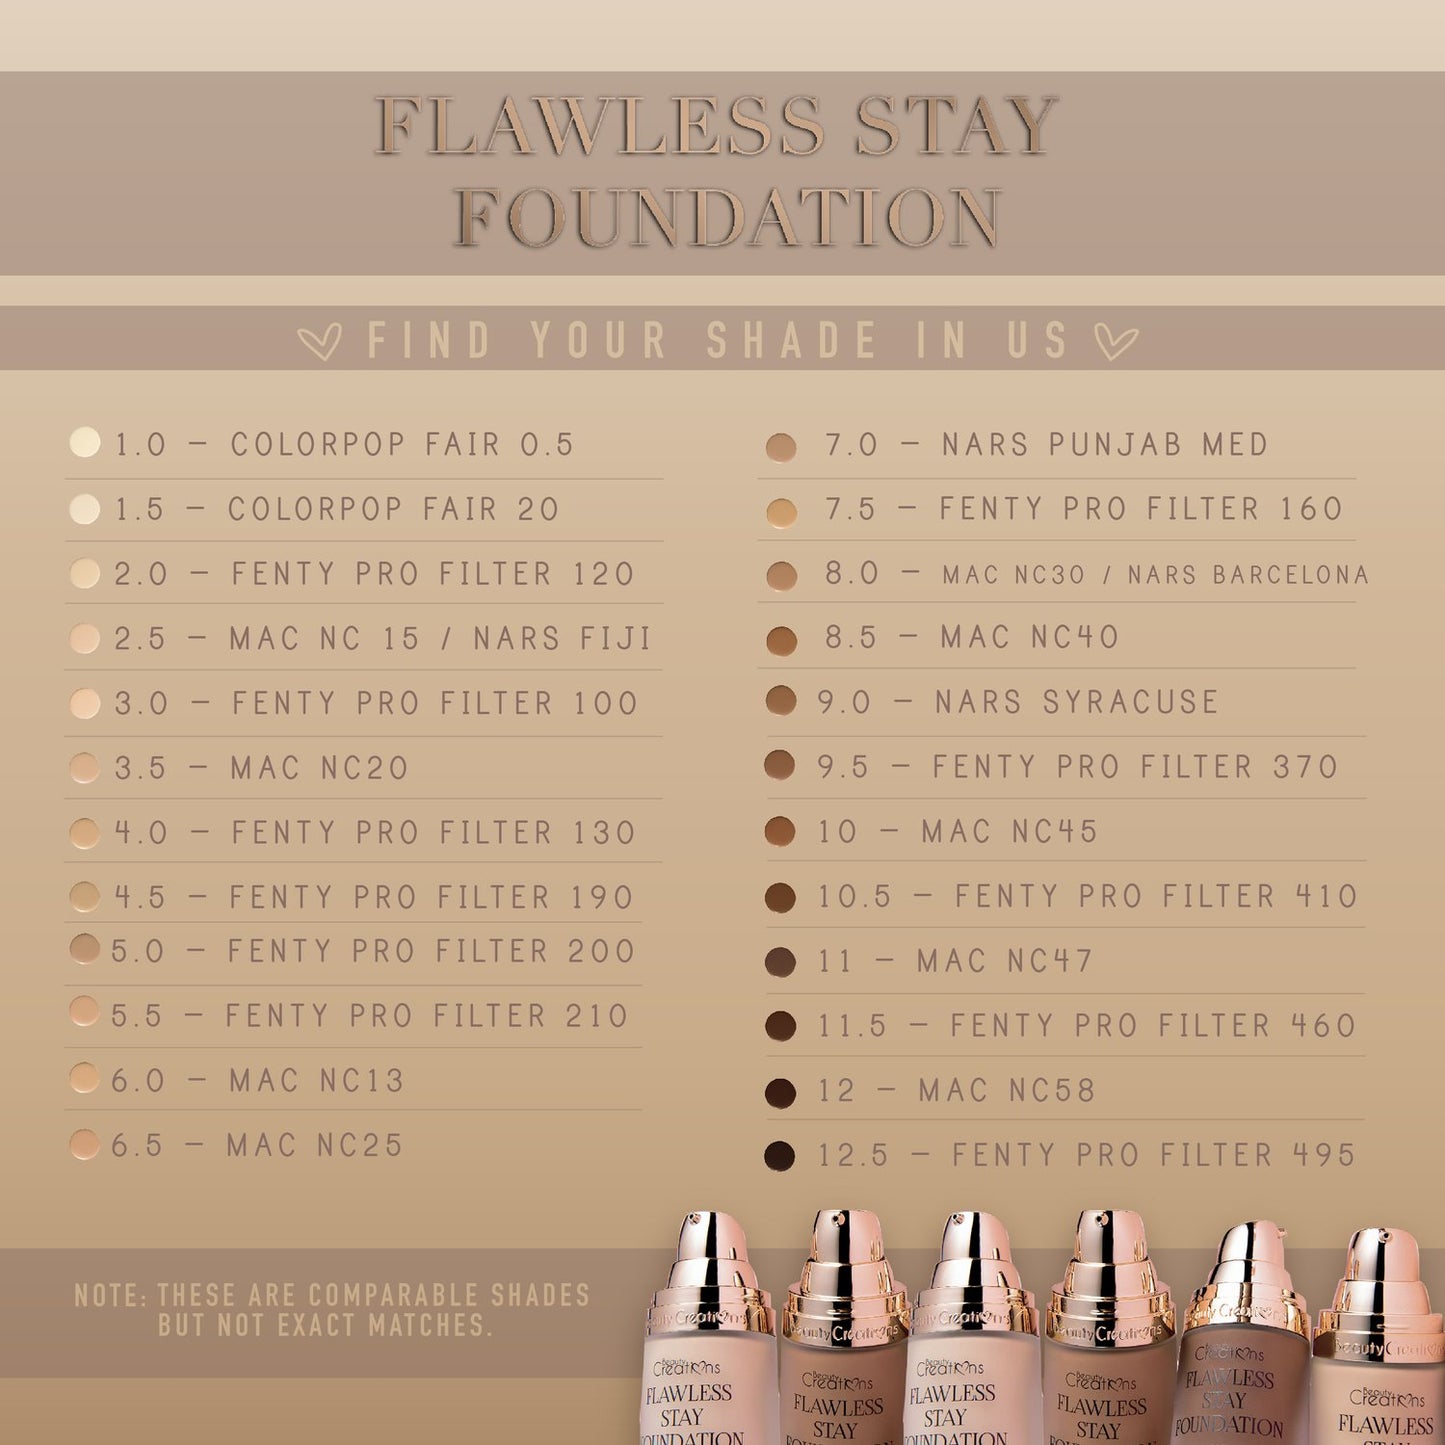 BEAUTY CREATIONS “FLAWLESS STAY FOUNDATION”